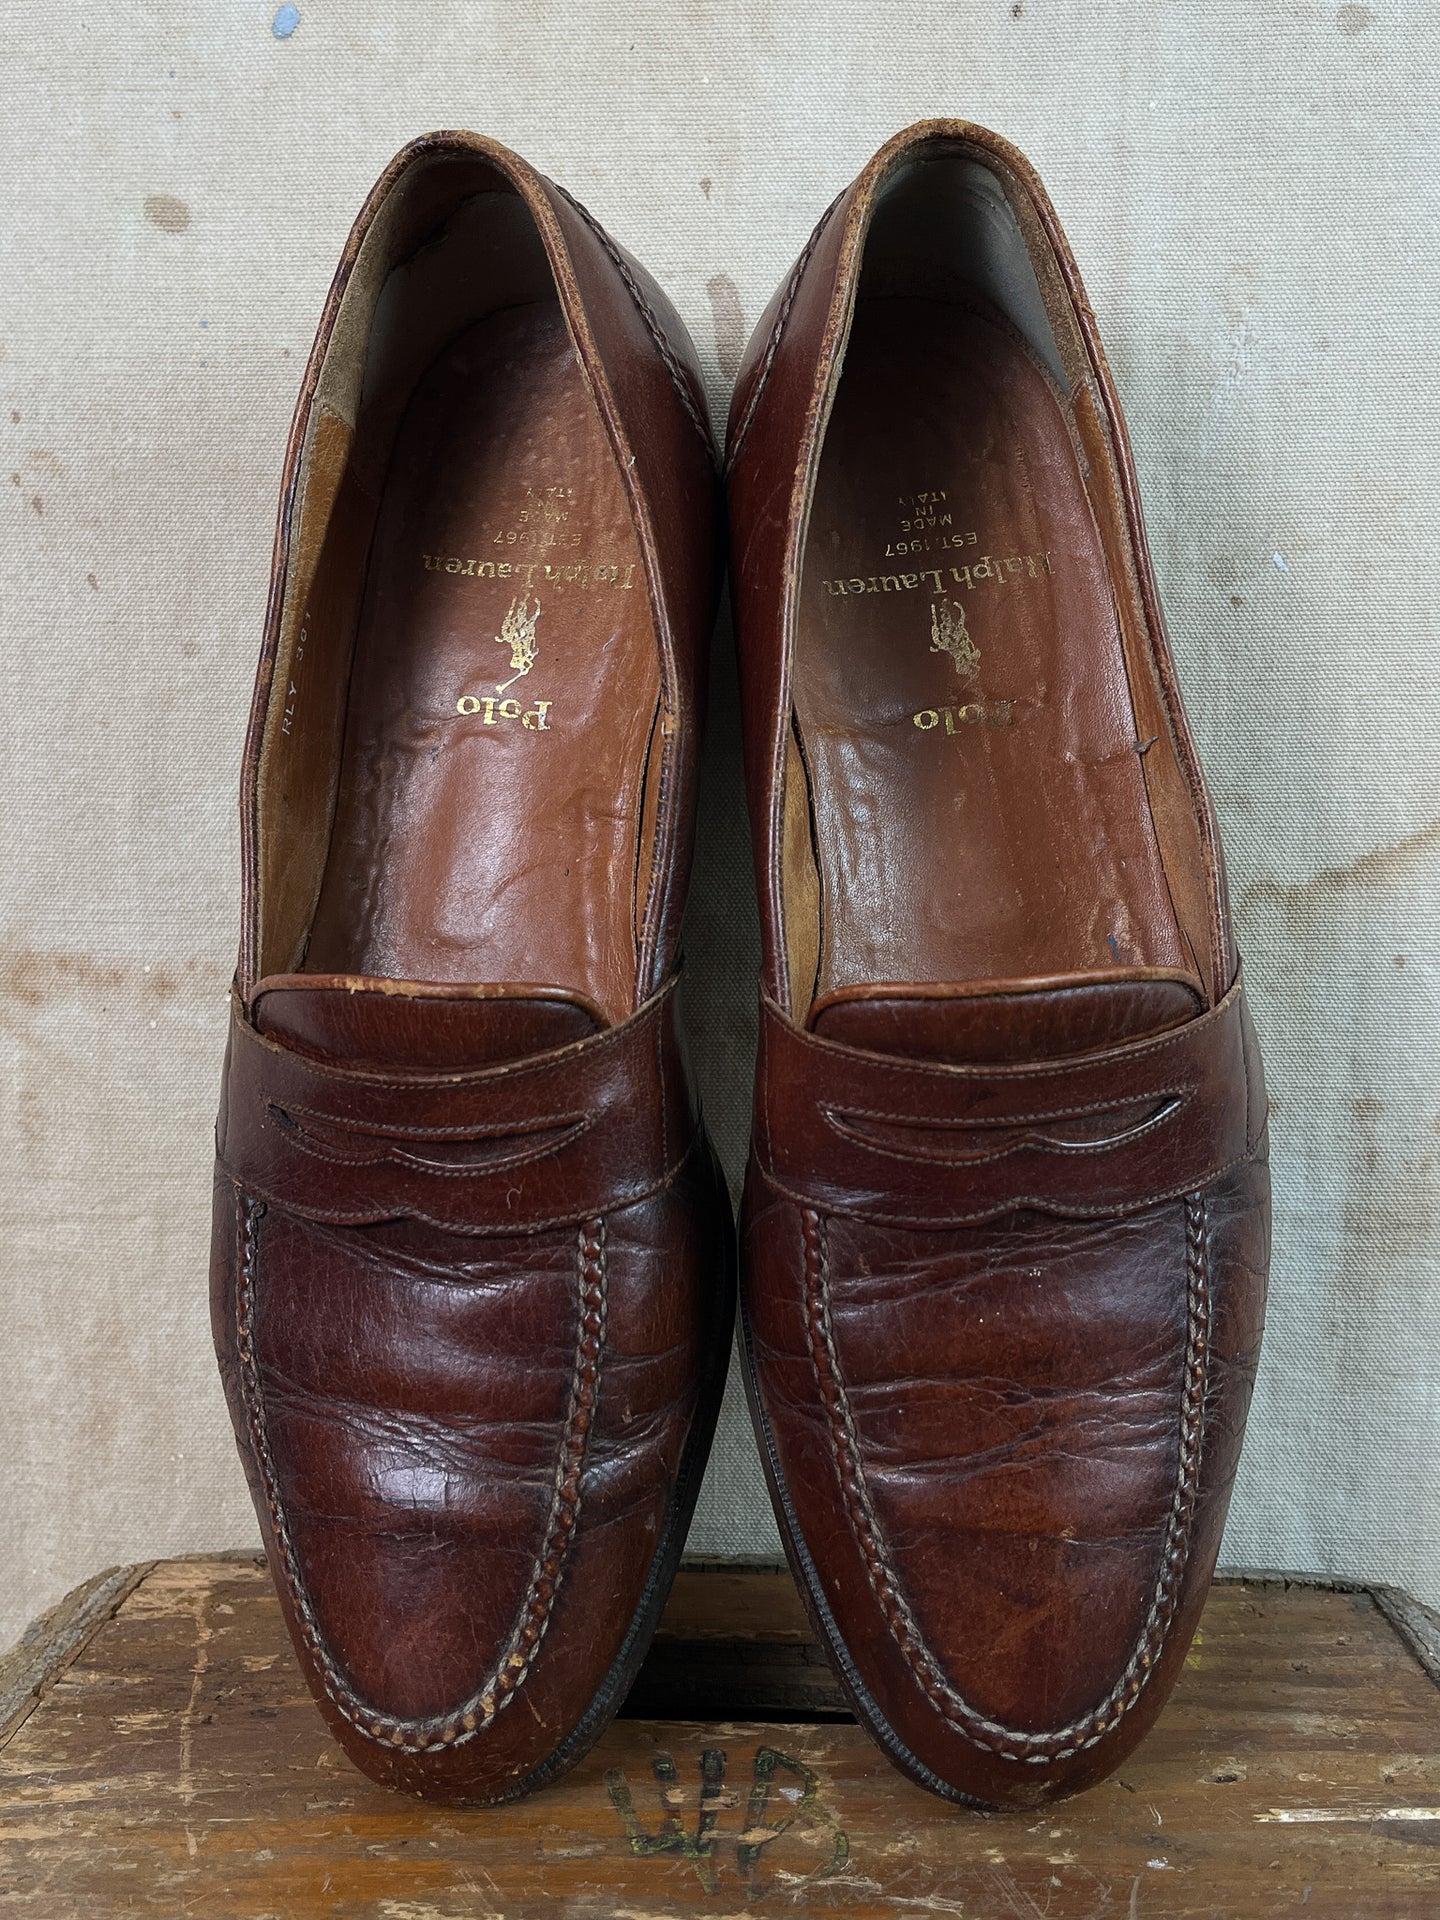 Polo Ralph Lauren Made in Italy Men's Loafers M9